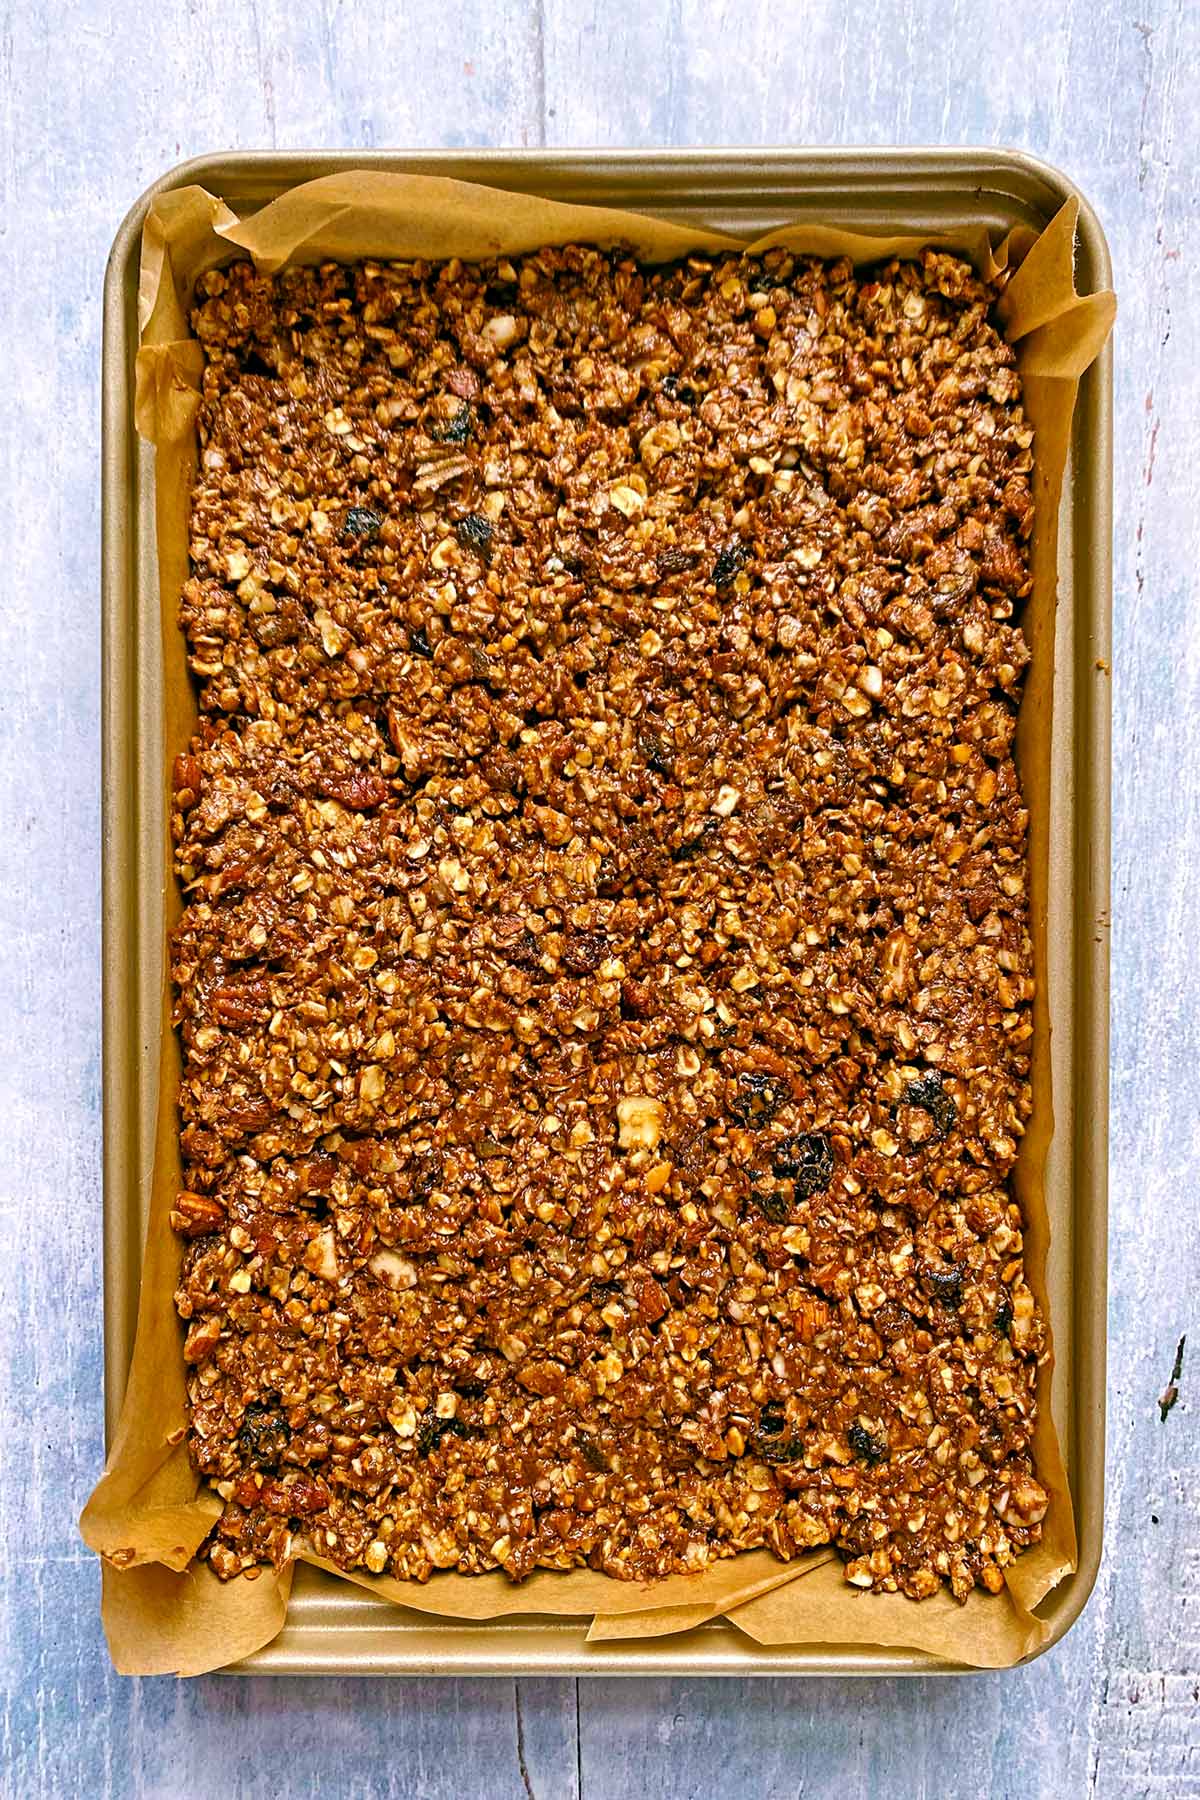 Granola mixture pressed down into a baking tray.